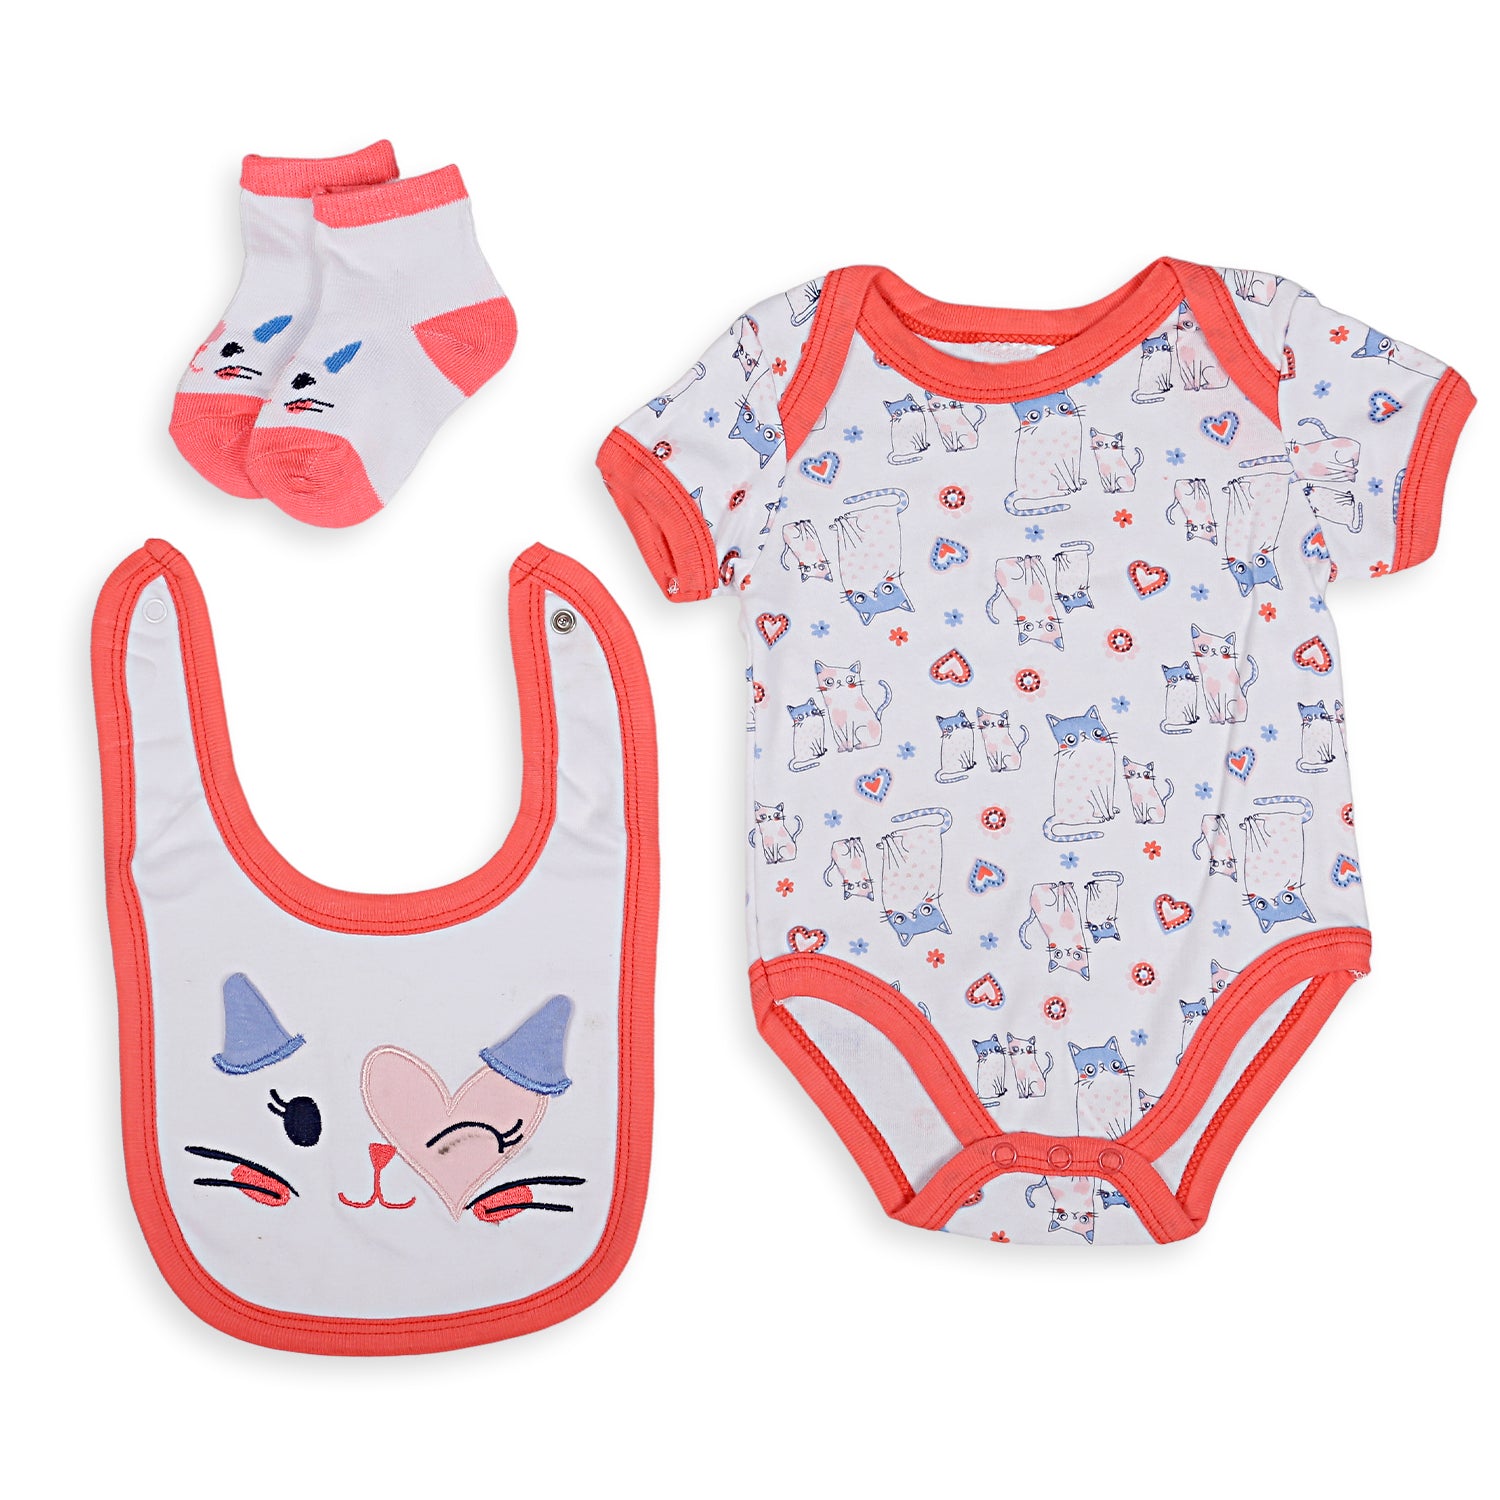 Gift Set Of 5 Bib Body Suits Pant And Socks Cat Multicolour